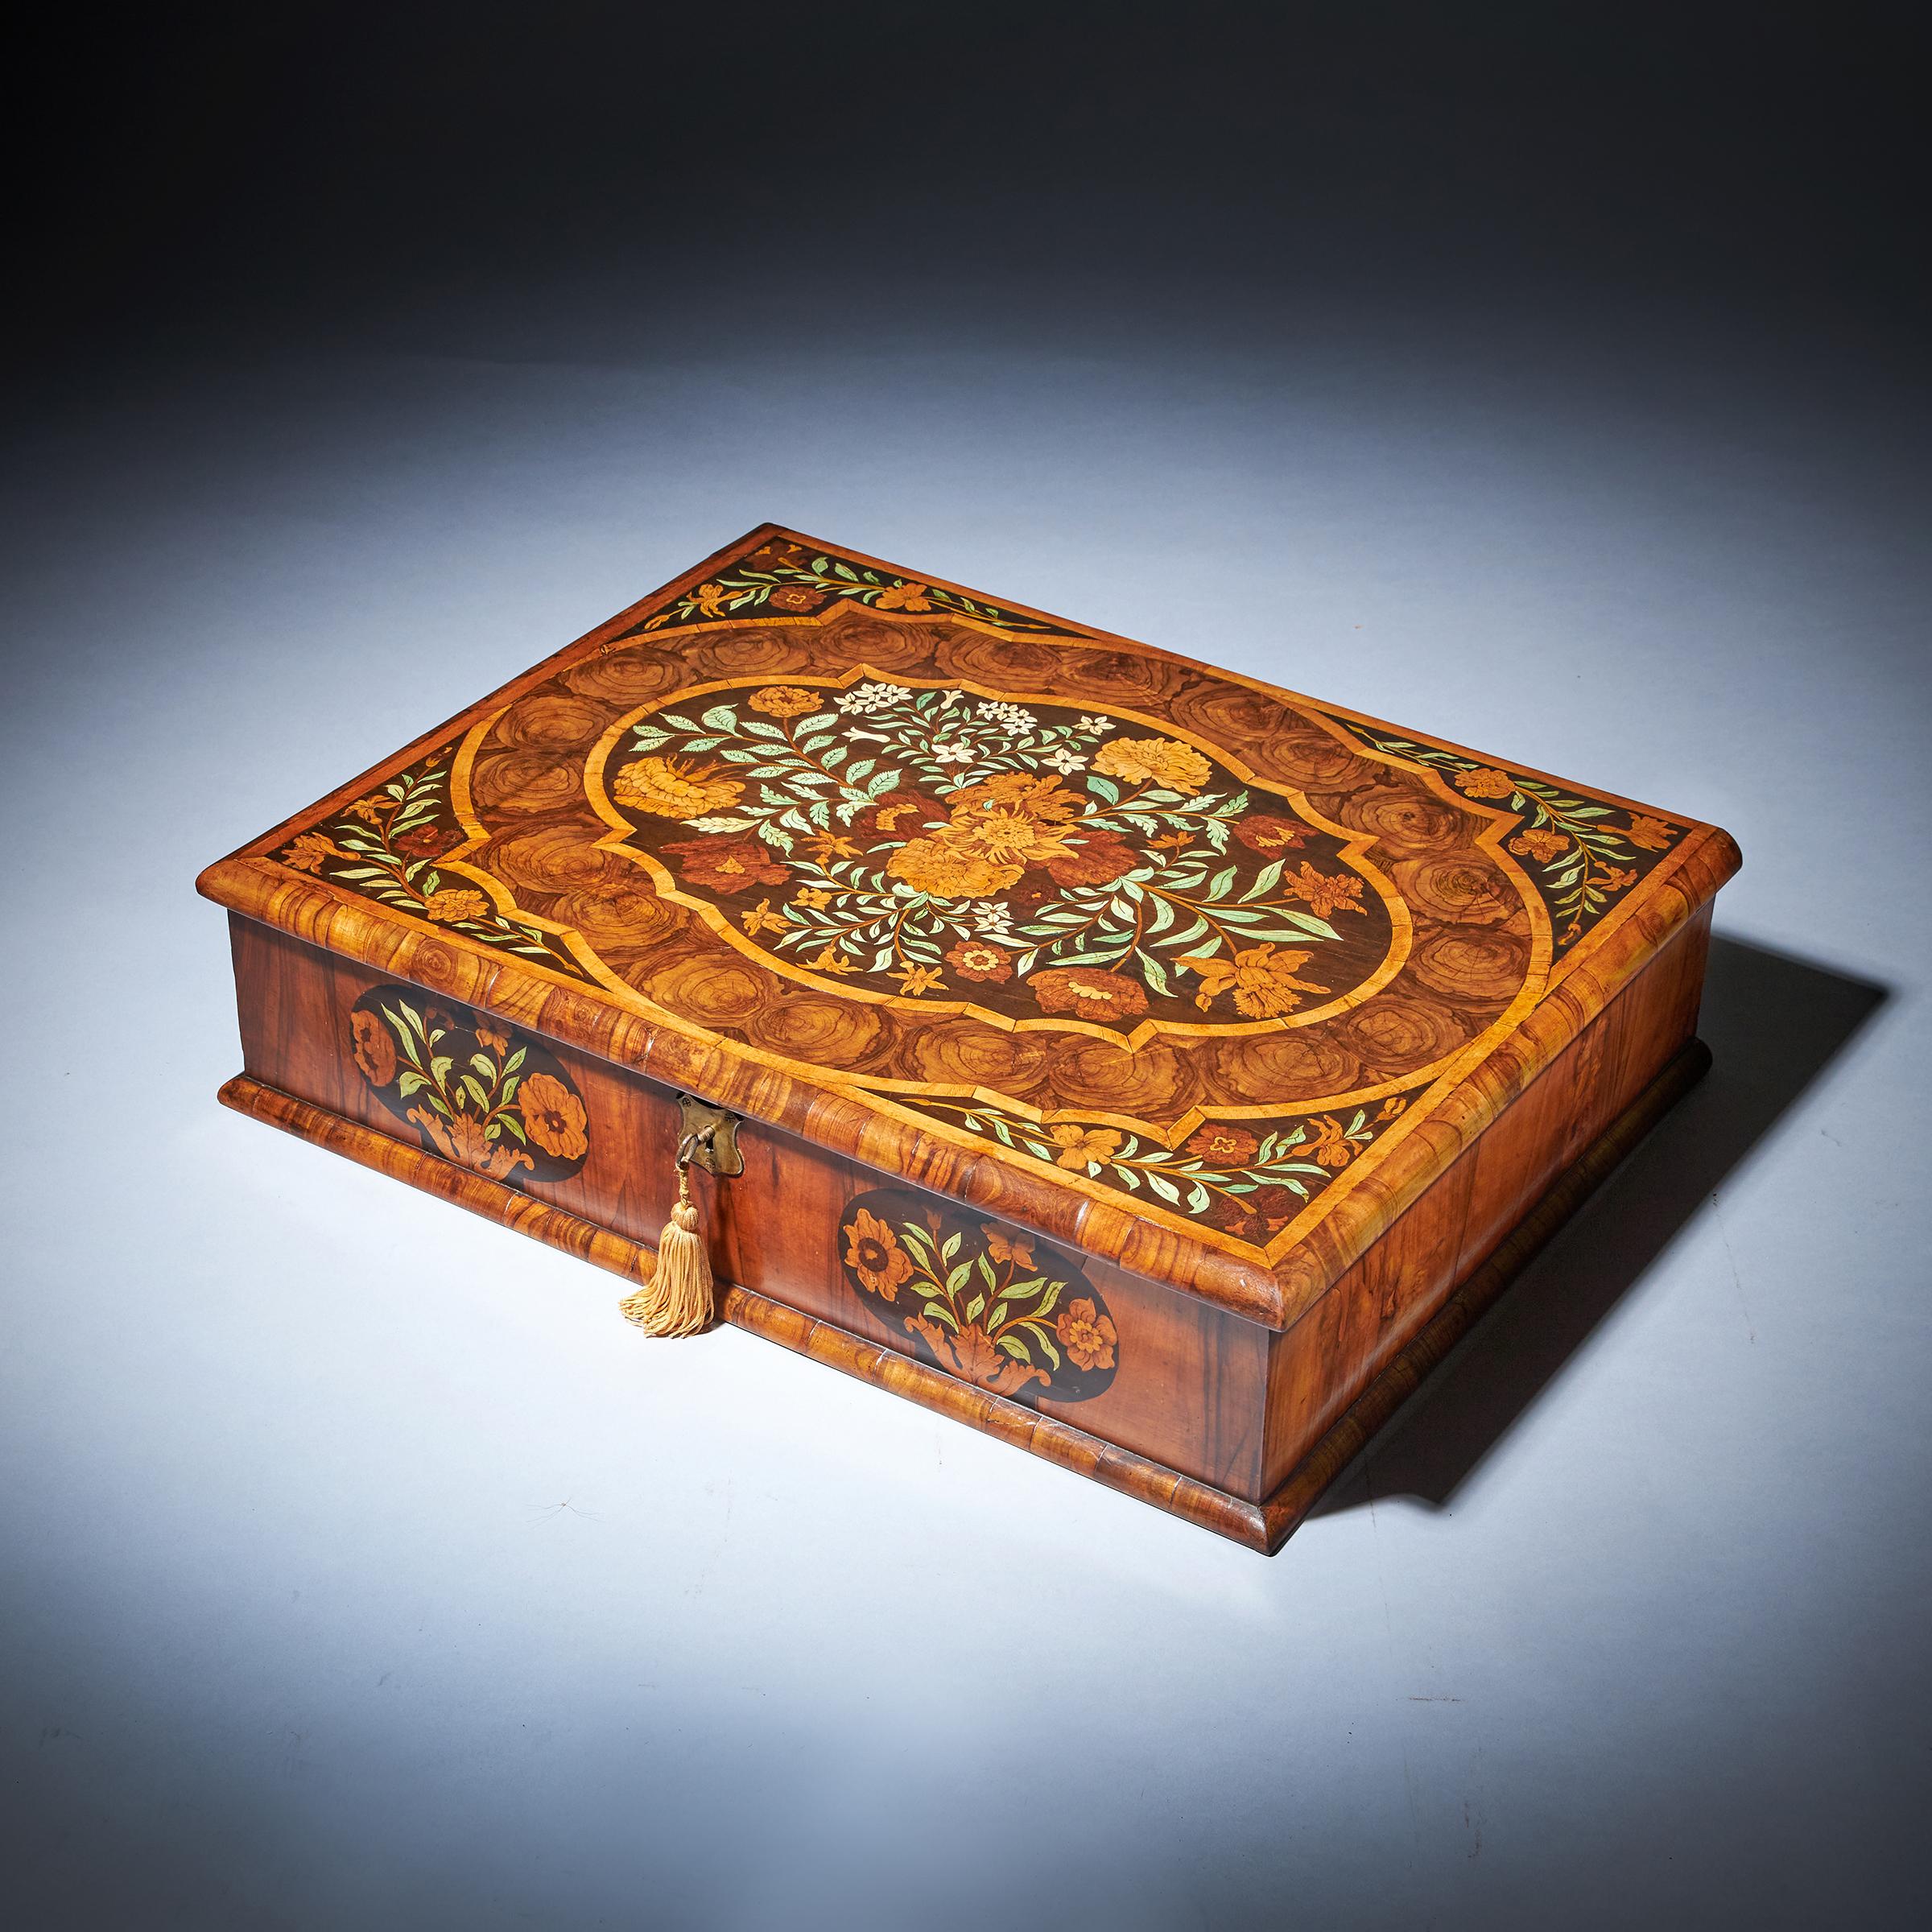 A fine and rare 17th-century William and Mary olive oyster marquetry lace box, circa 1670-1690. 9